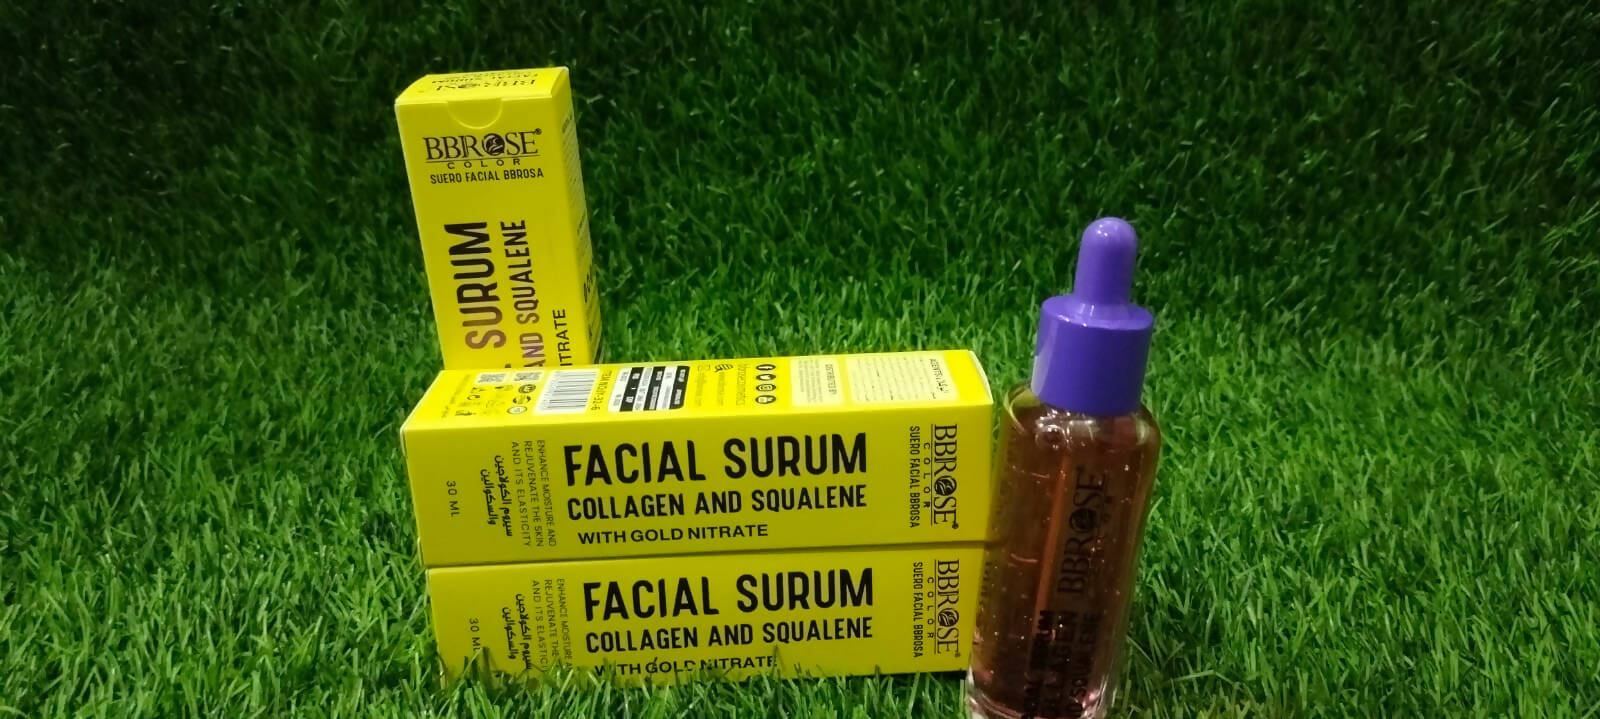 Facial Sour Collagen And Squalene serum